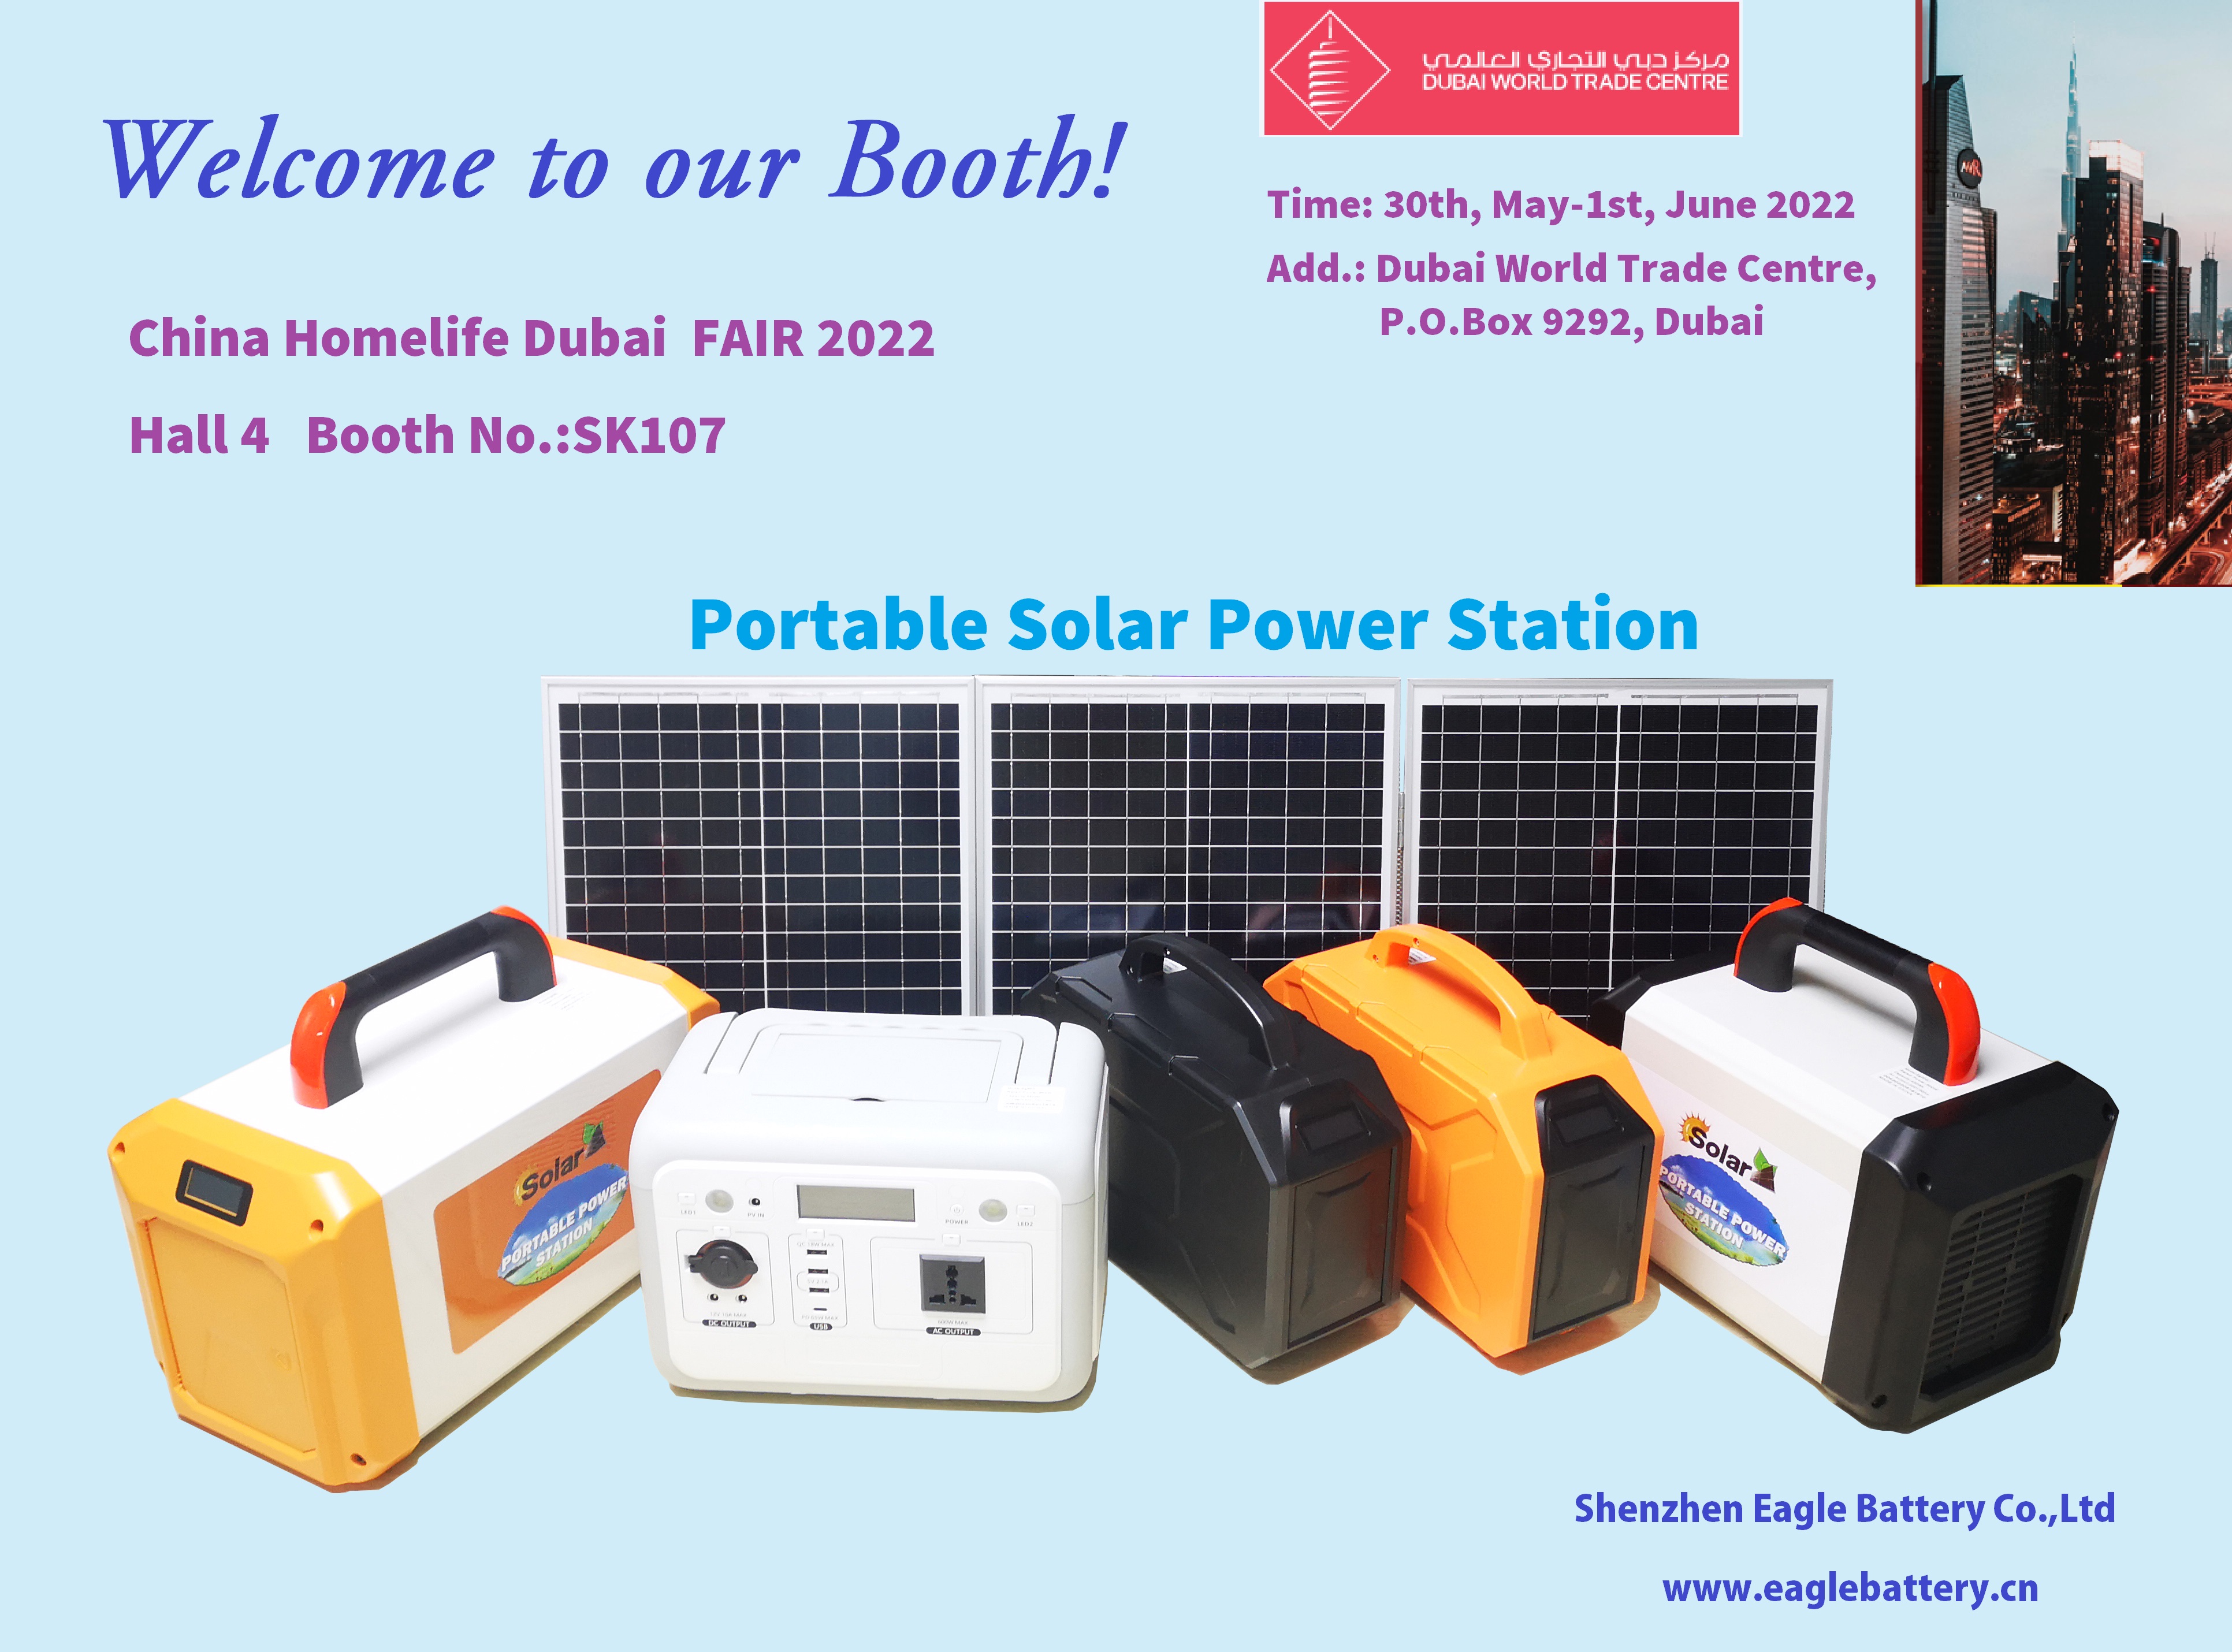 Rechargeable Battery, Agm Battery, Sla Battery, Portable Power Station,  Solar Power Generator, Solar Power Home Systems